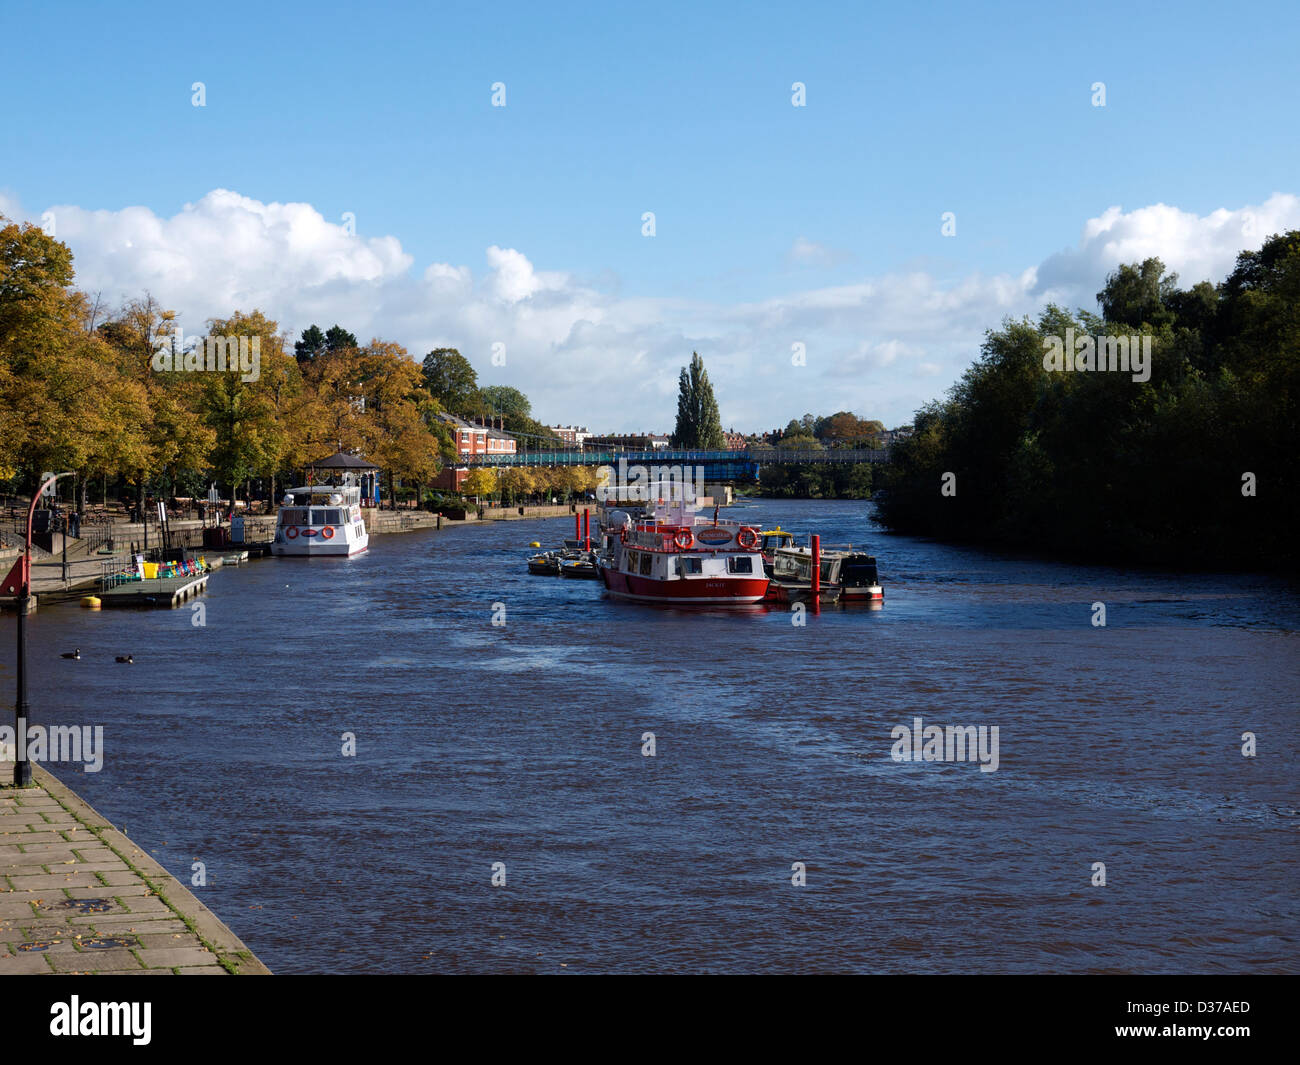 Boats on the River Dee in Chester, England, UK. Stock Photo